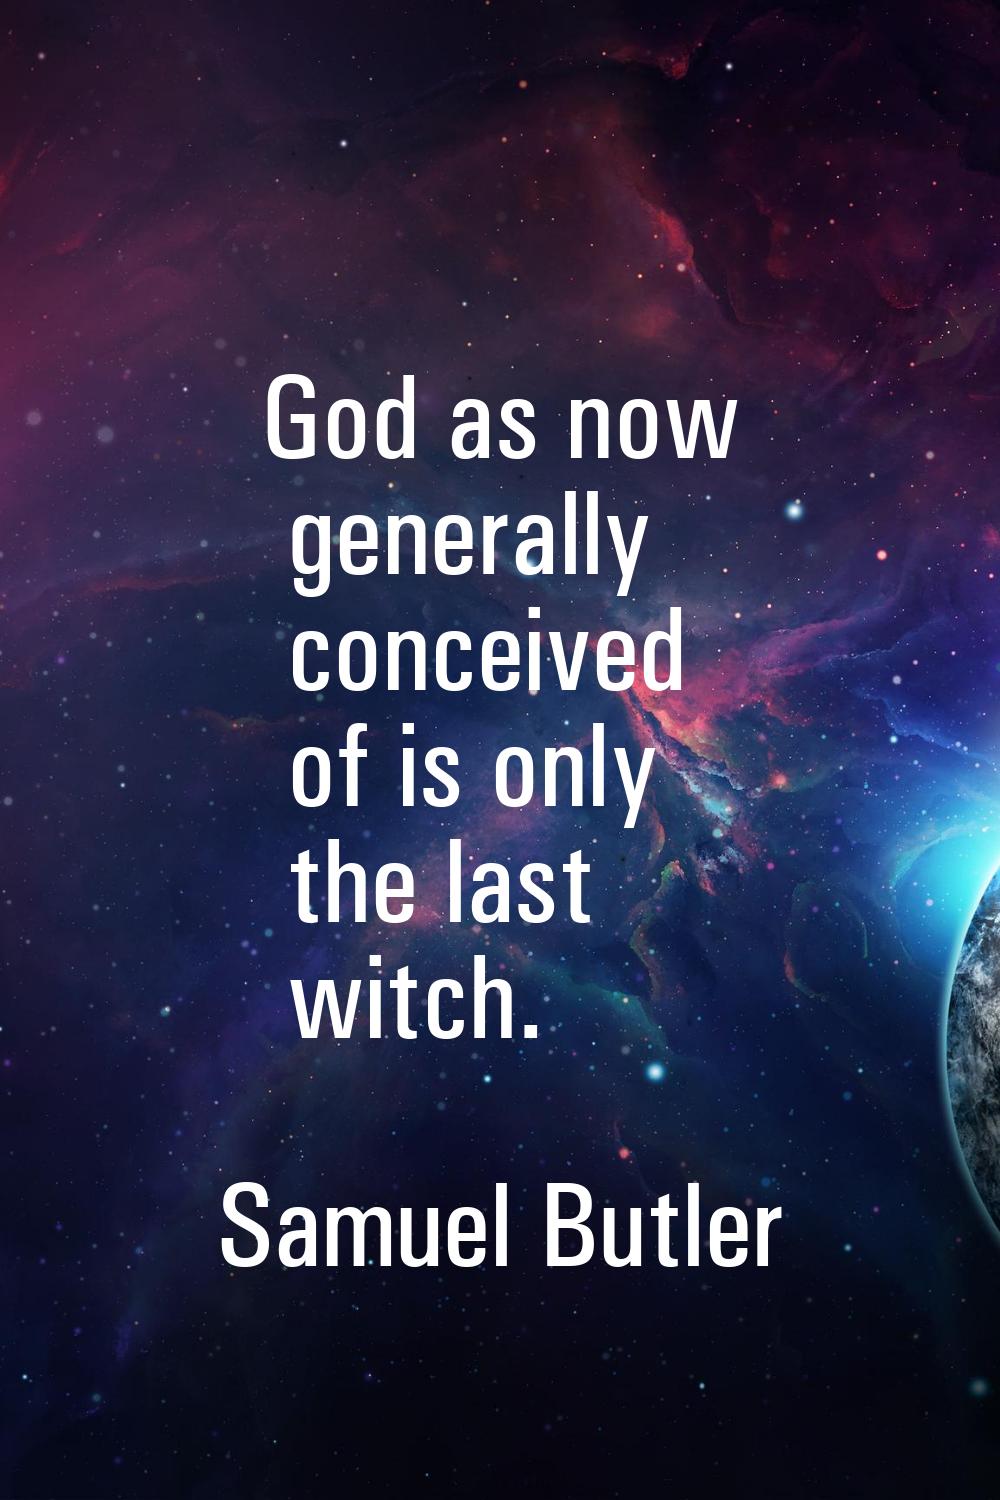 God as now generally conceived of is only the last witch.